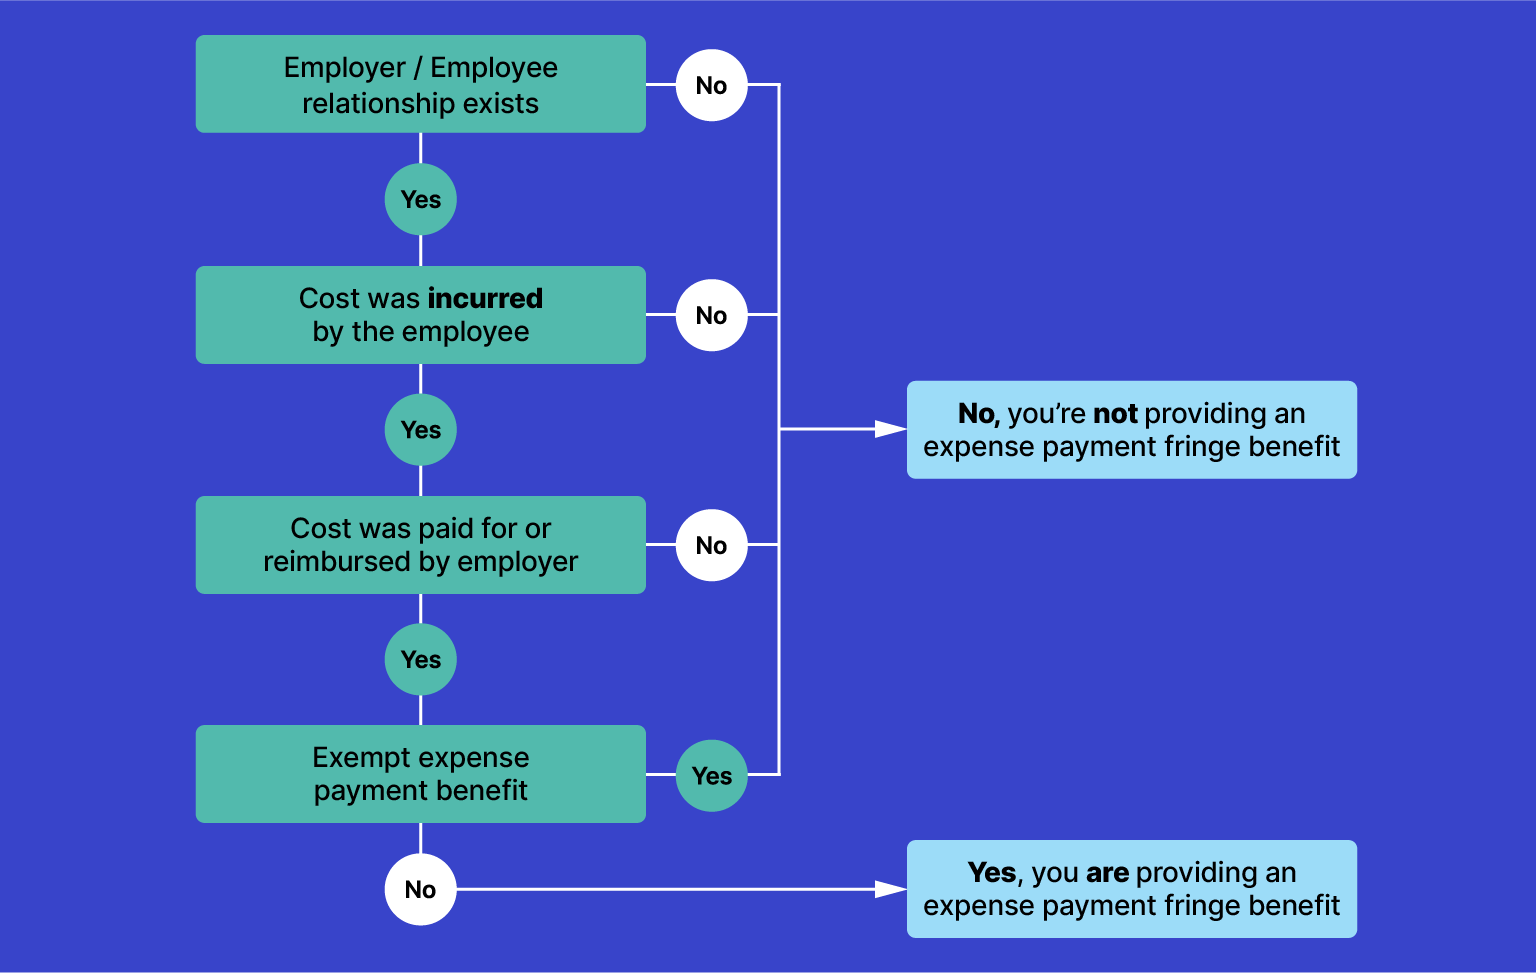 The questions to work out if you’re providing an expense payment fringe benefit are: Does an employer/employee relationship exist? Was the cost incurred by the employee? Was the cost paid for or reimbursed by the employer? If you answered ‘yes’ to these questions, you’re providing an expense payment fringe benefit. If you answered ‘No’ to or if the benefit is an exempt expense payment benefit, you’re not providing a fringe benefit.